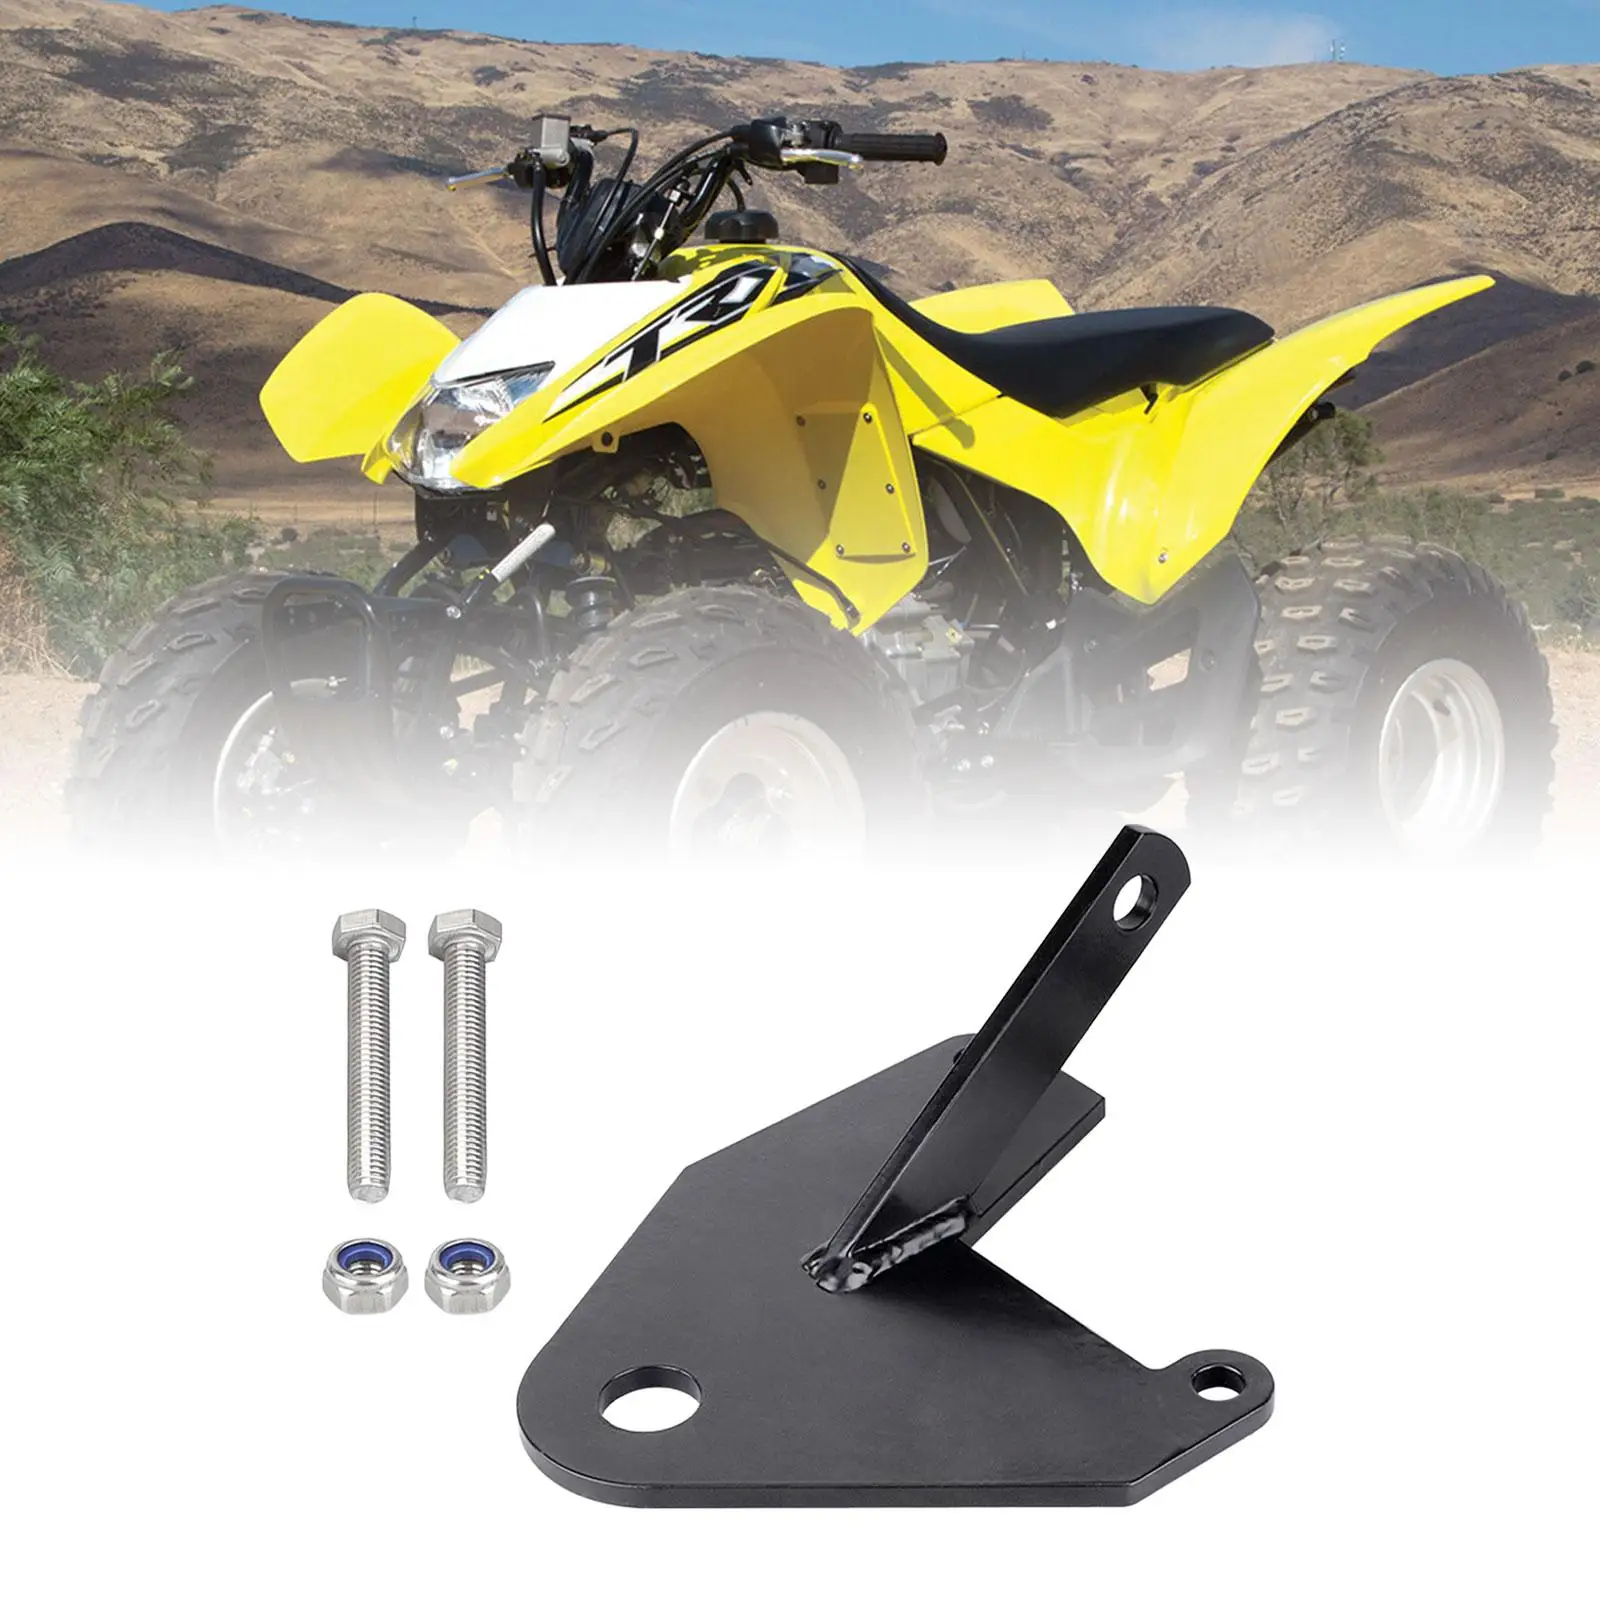 Trailer Hitch Receiver Ball Mount, ATV Ball Hitch with Hardware, Professional,